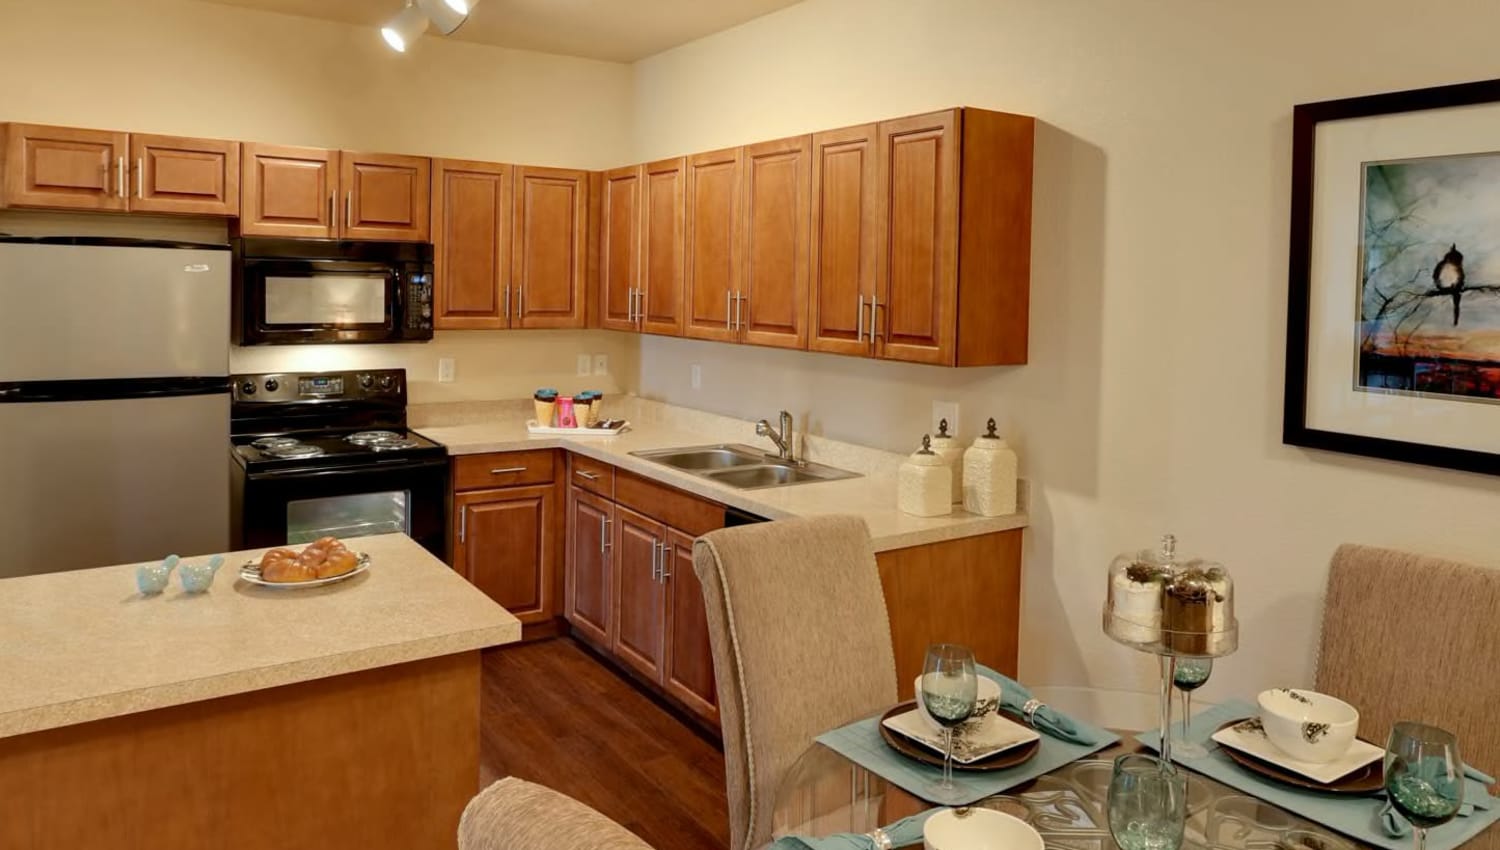 Model kitchen and dining table at The Preserve at Greenway Park in Casper, Wyoming